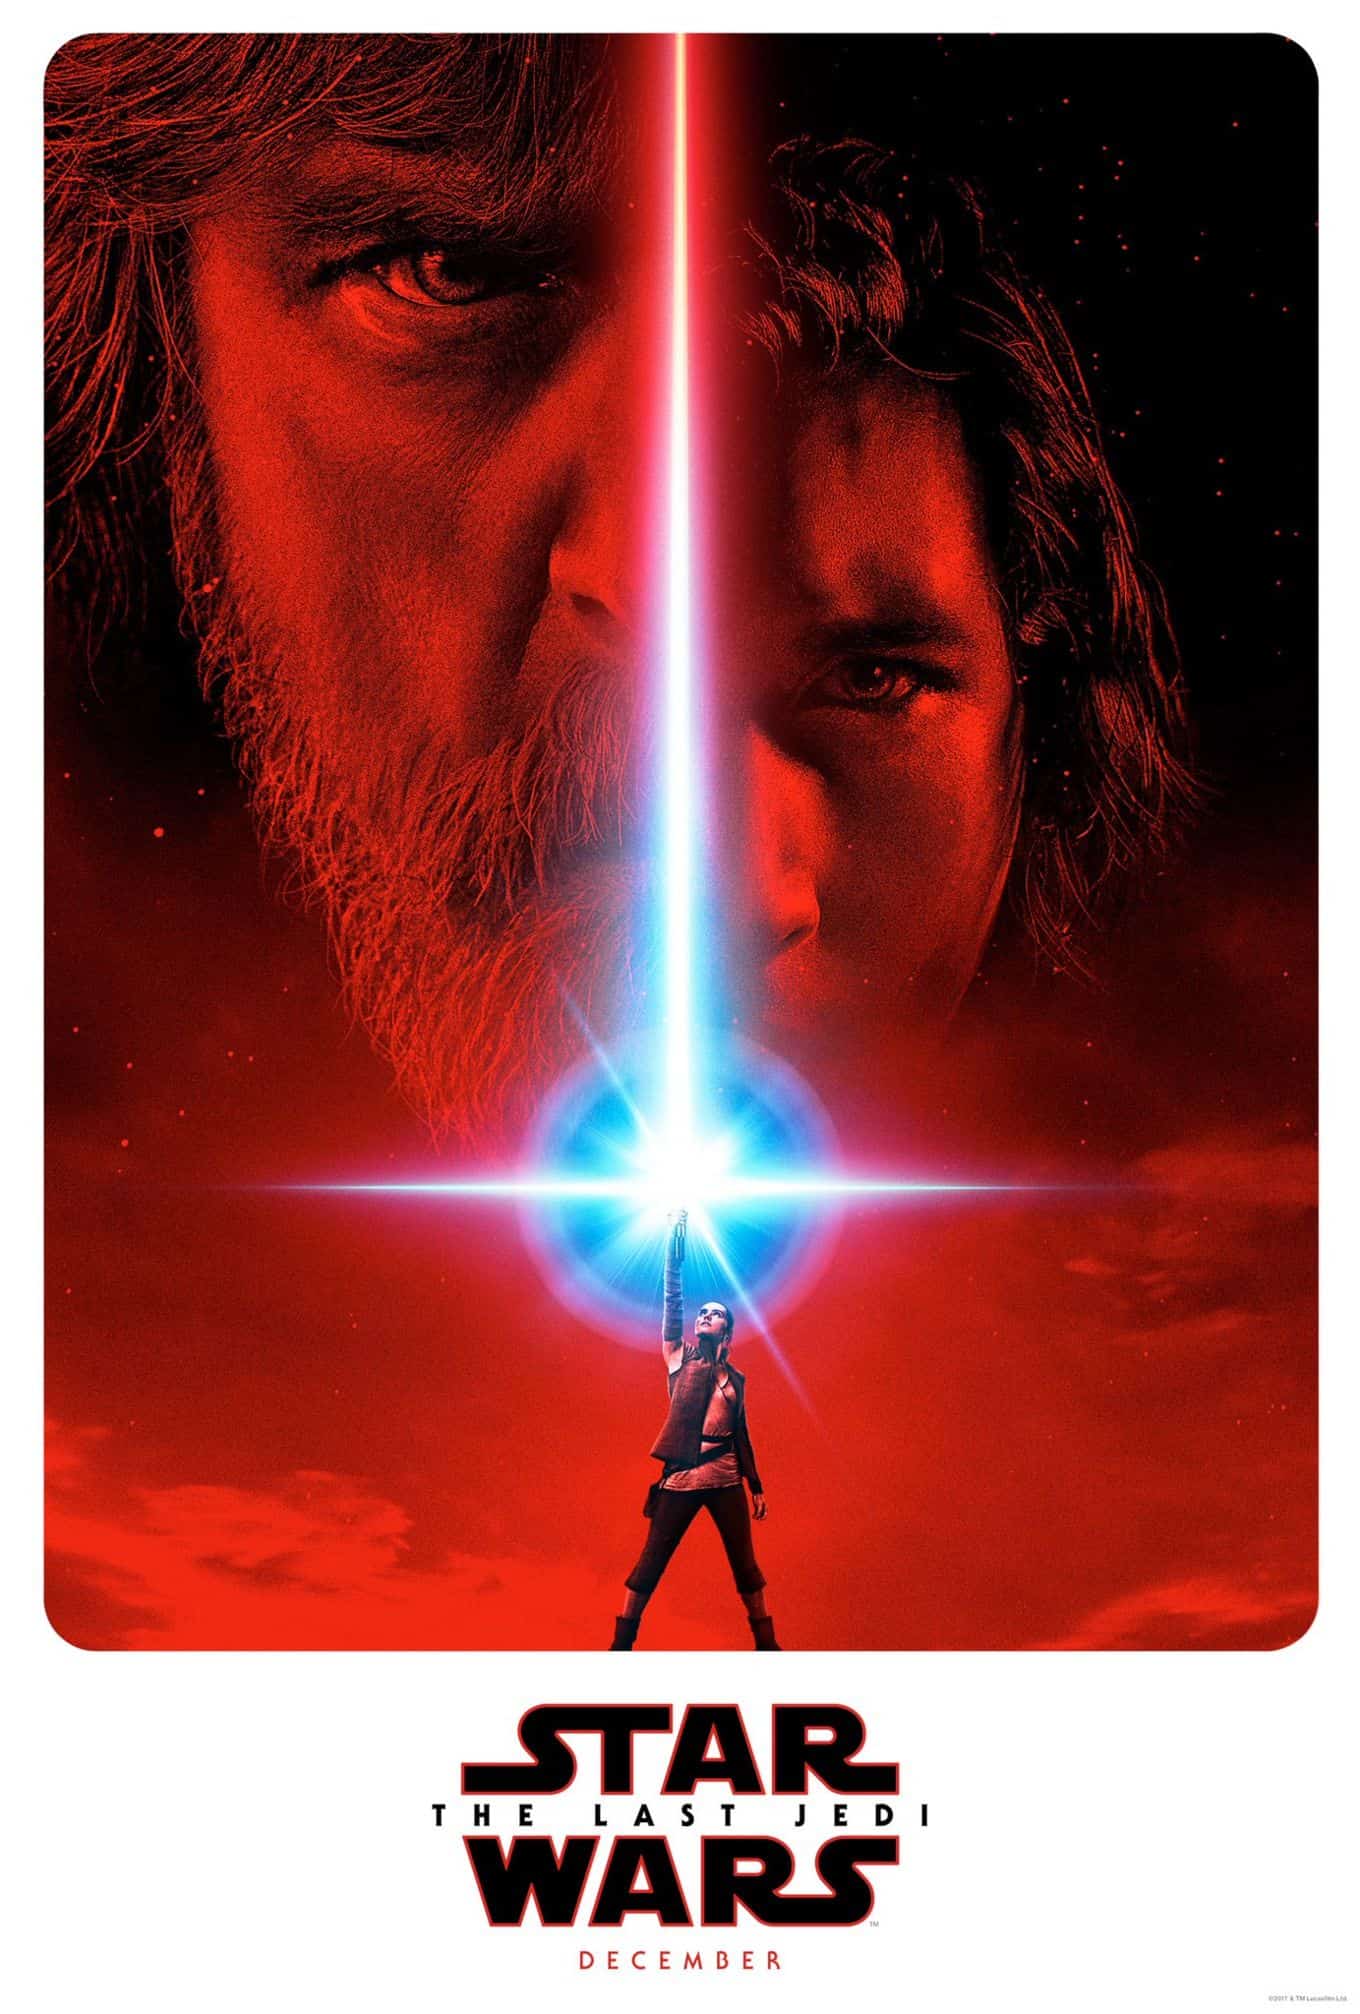 Star Wars Episode Viii The Last Jedi Poster New Trailer Unveiled